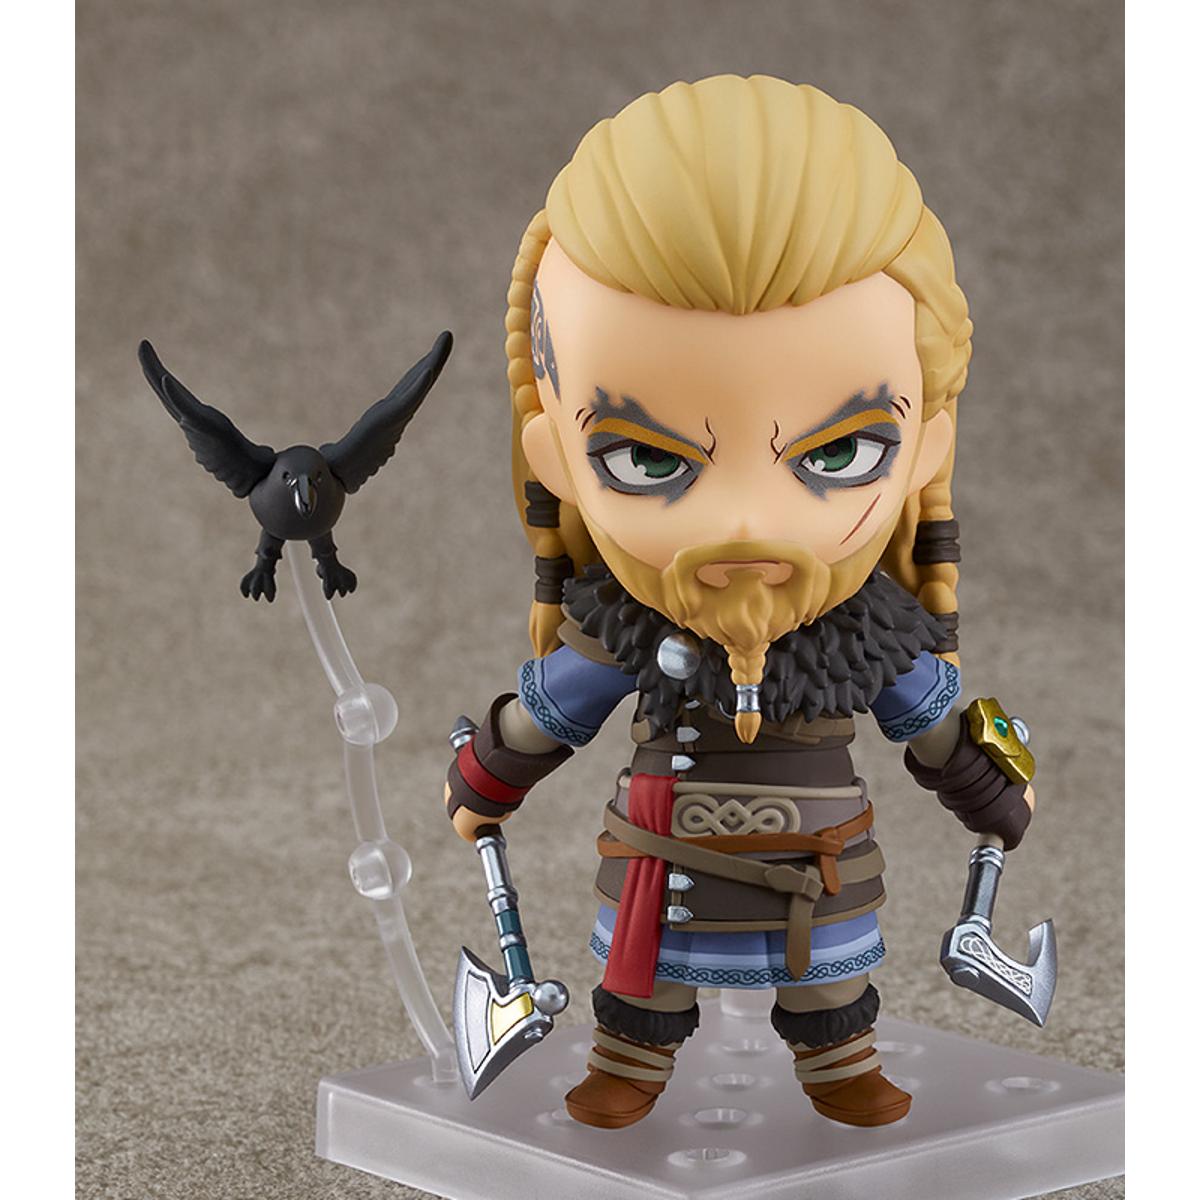 Assassin’s Creed Valhalla Getting Grumpy Eivor Nendoroid by Good Smile Company